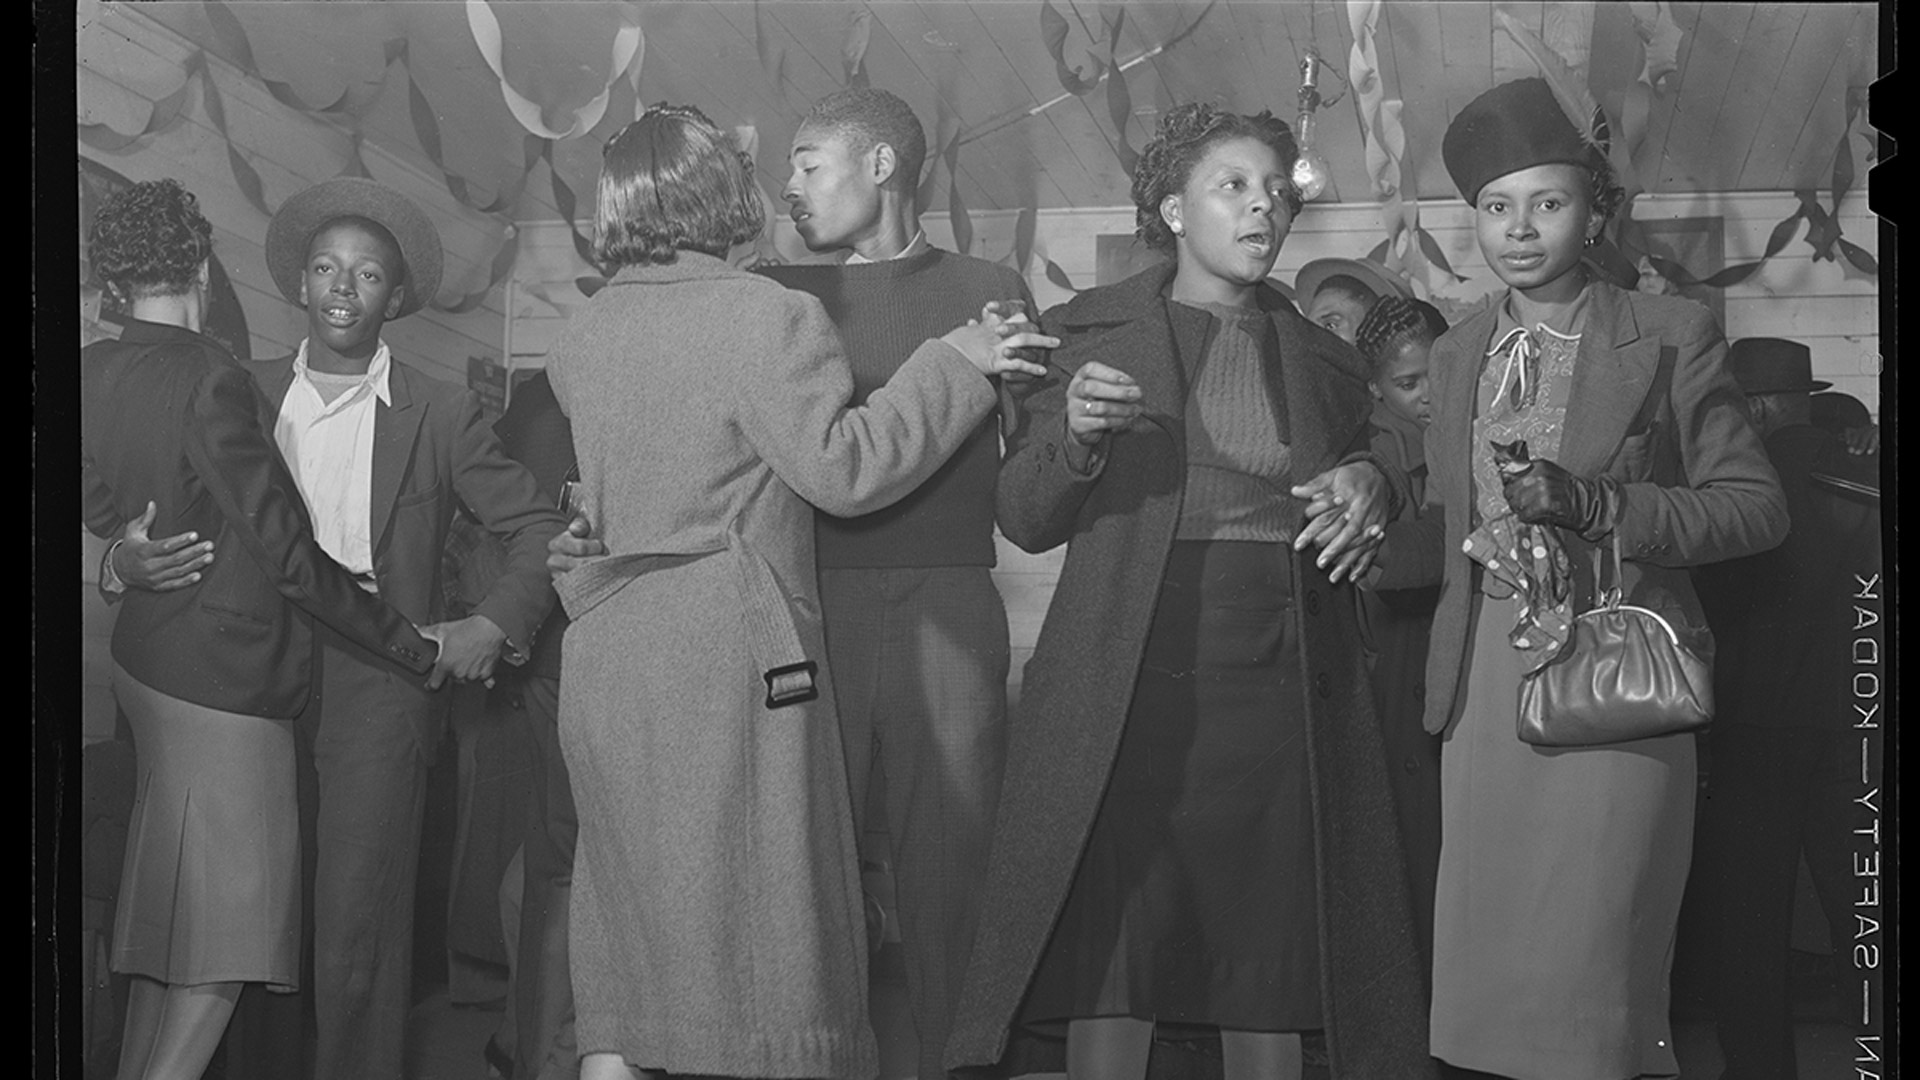 African American men and women dancing together.